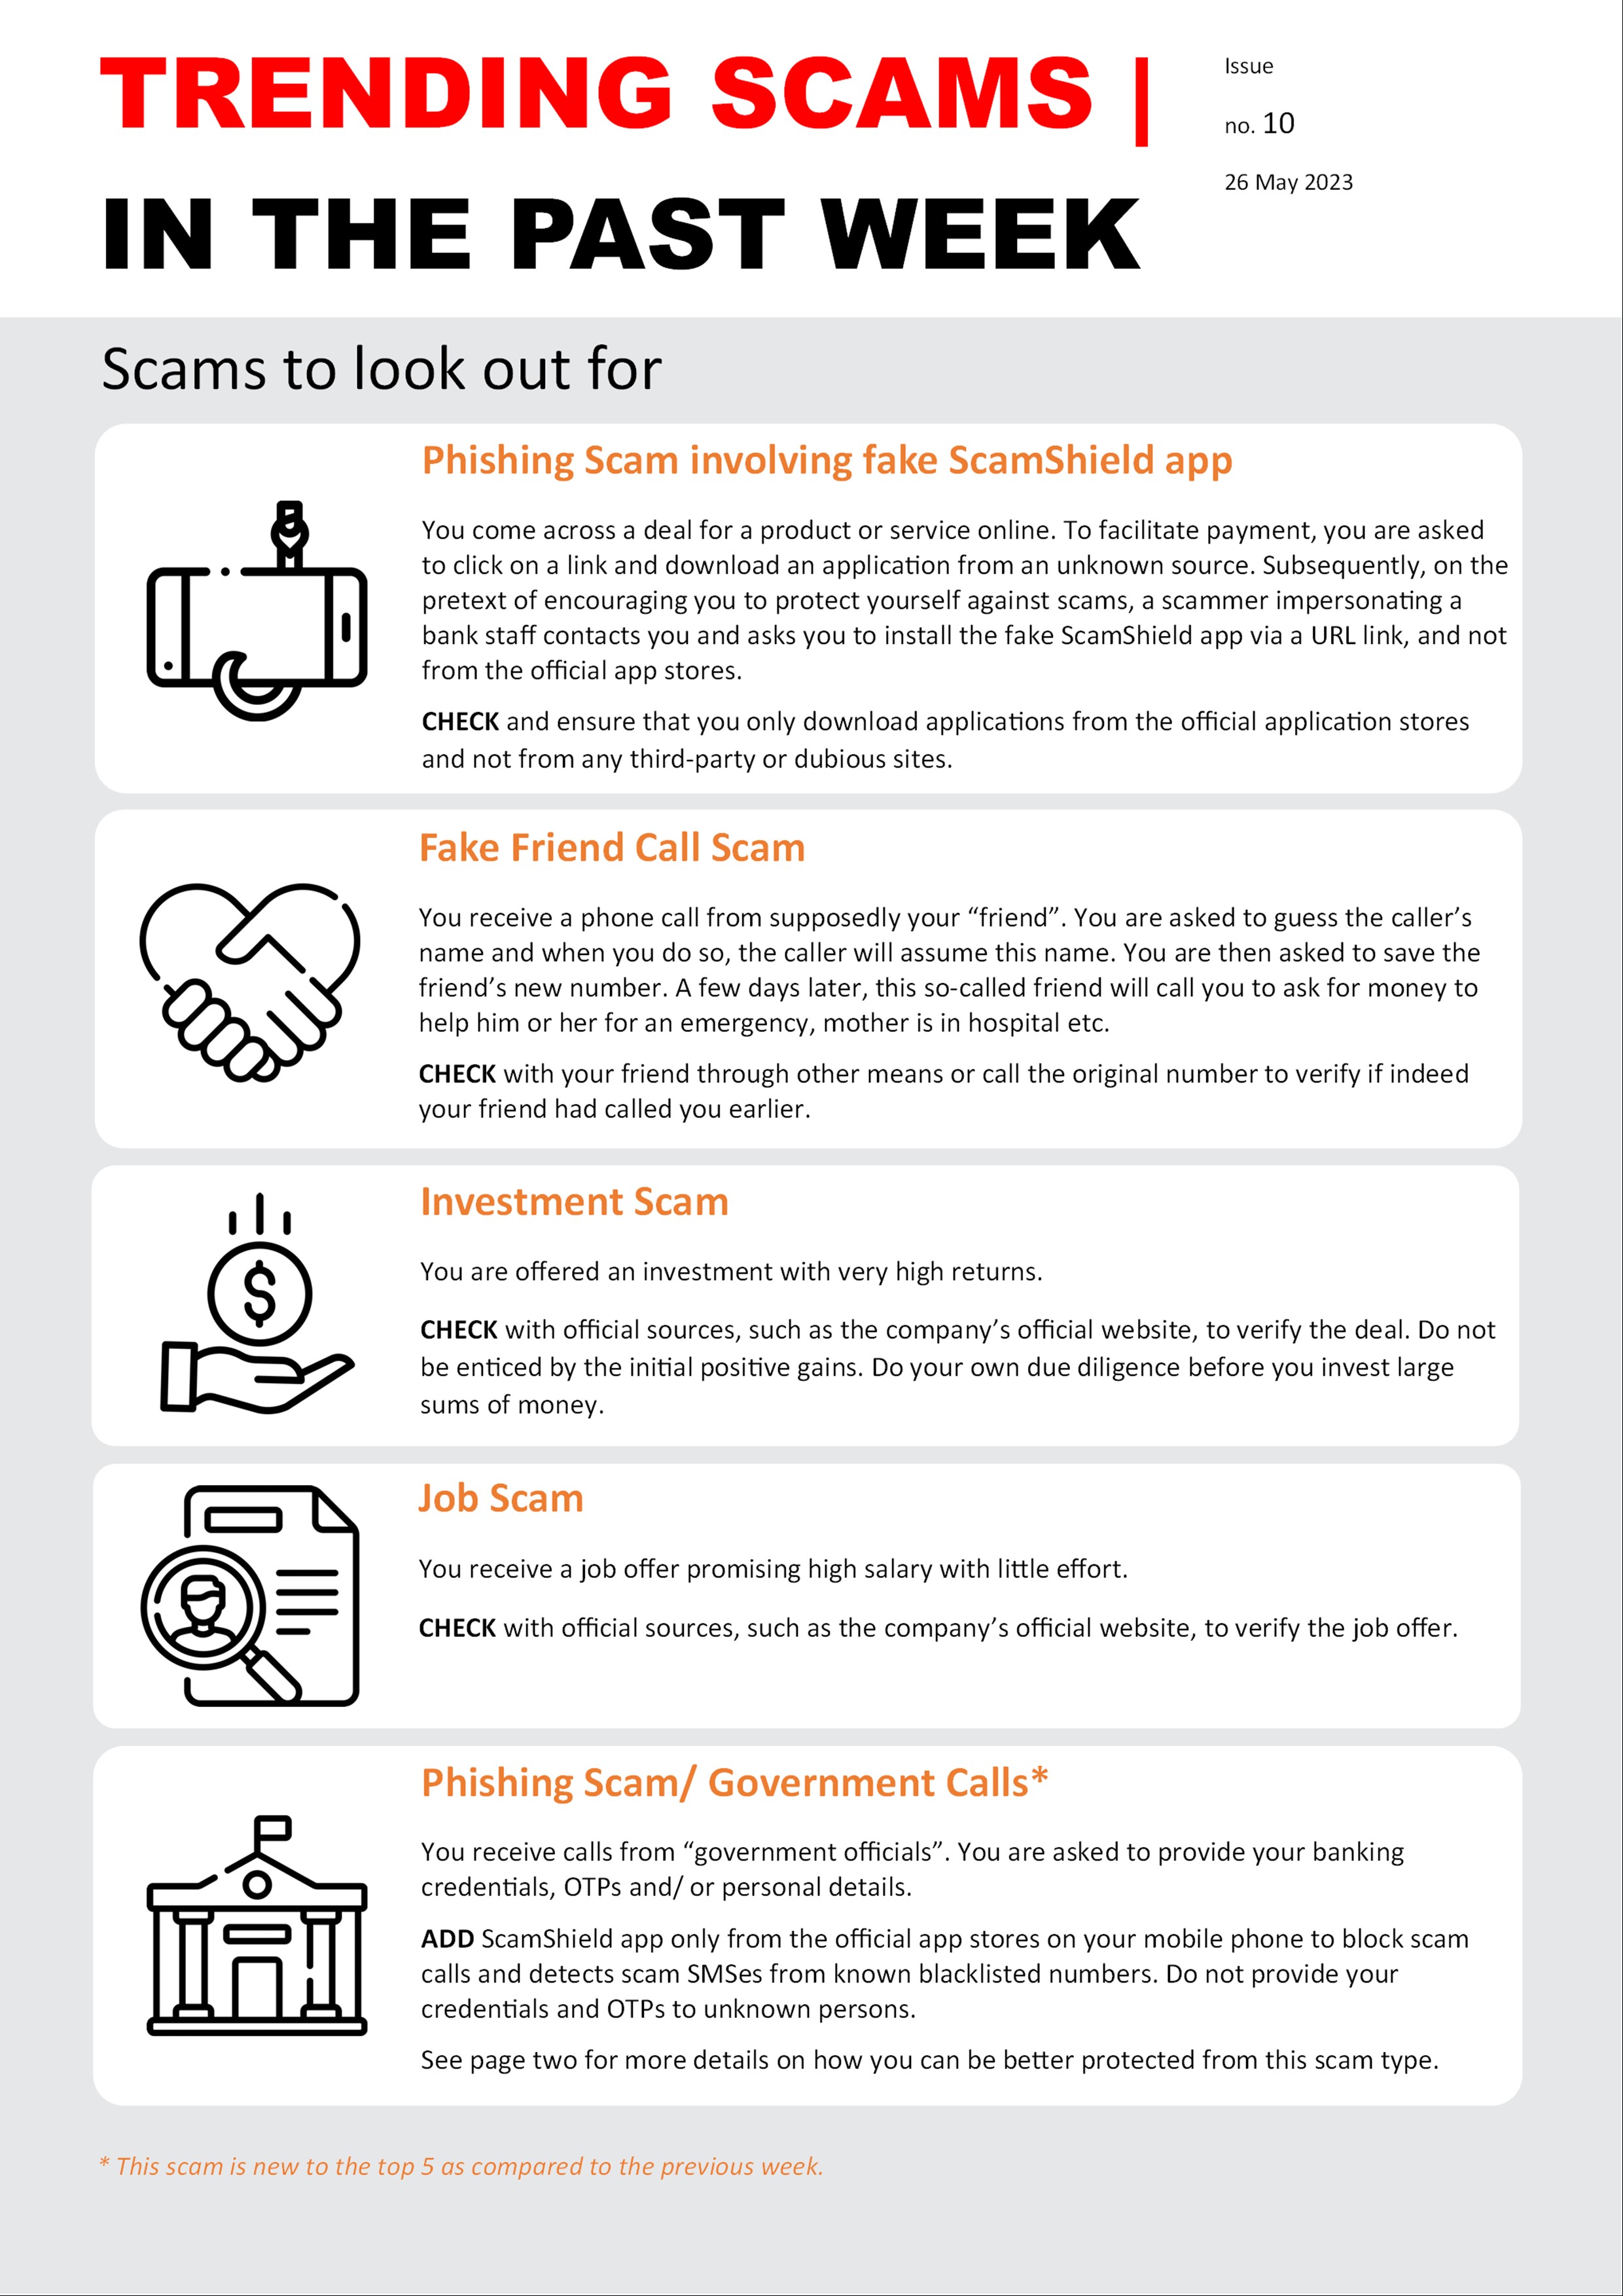 Weekly Bulletin Issue 10 - Scams to look out for